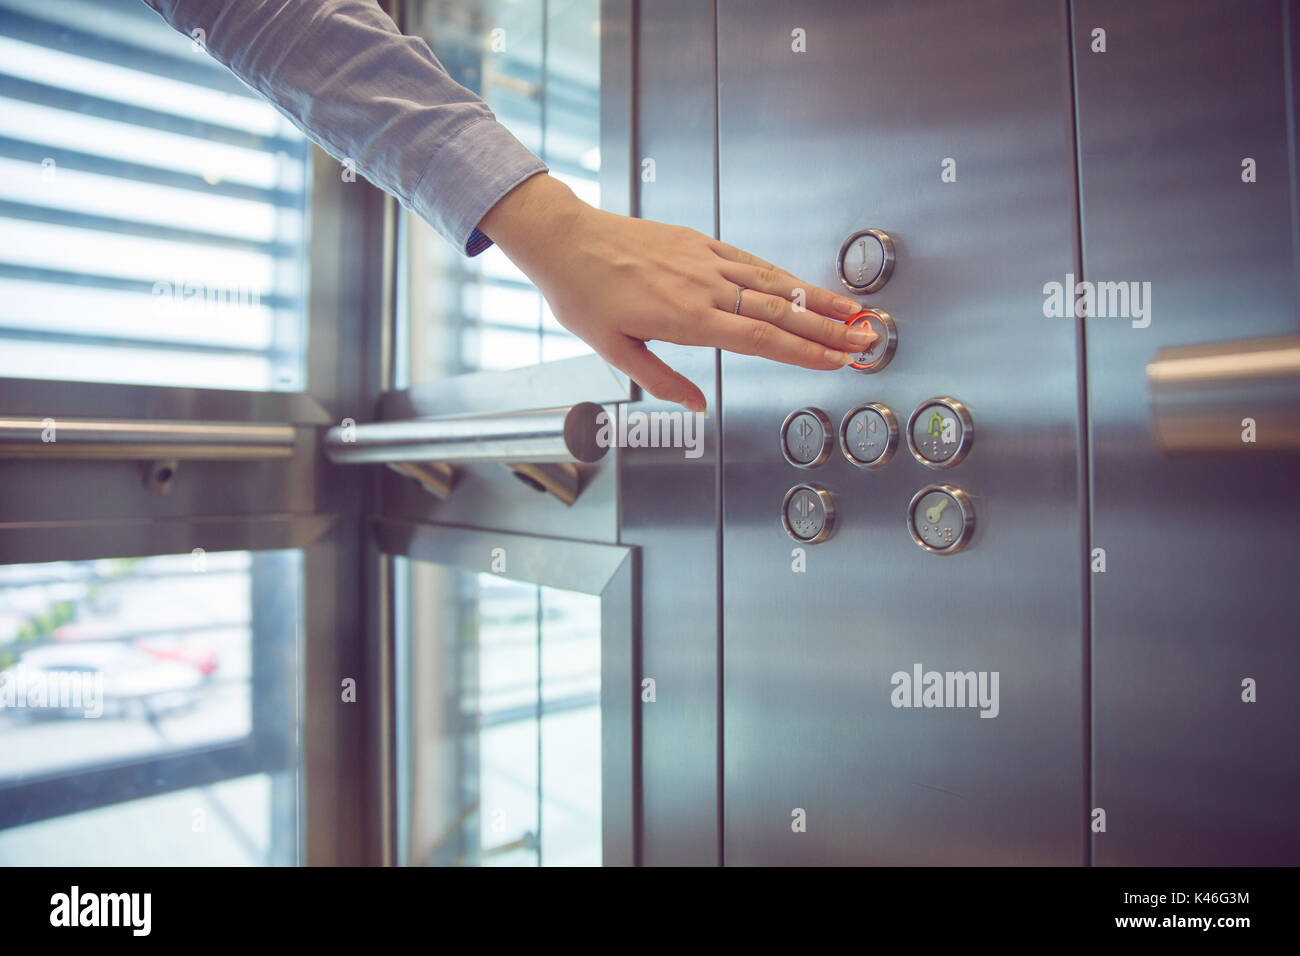 Close up on woman's hand pushing button in elevator. Stock Photo